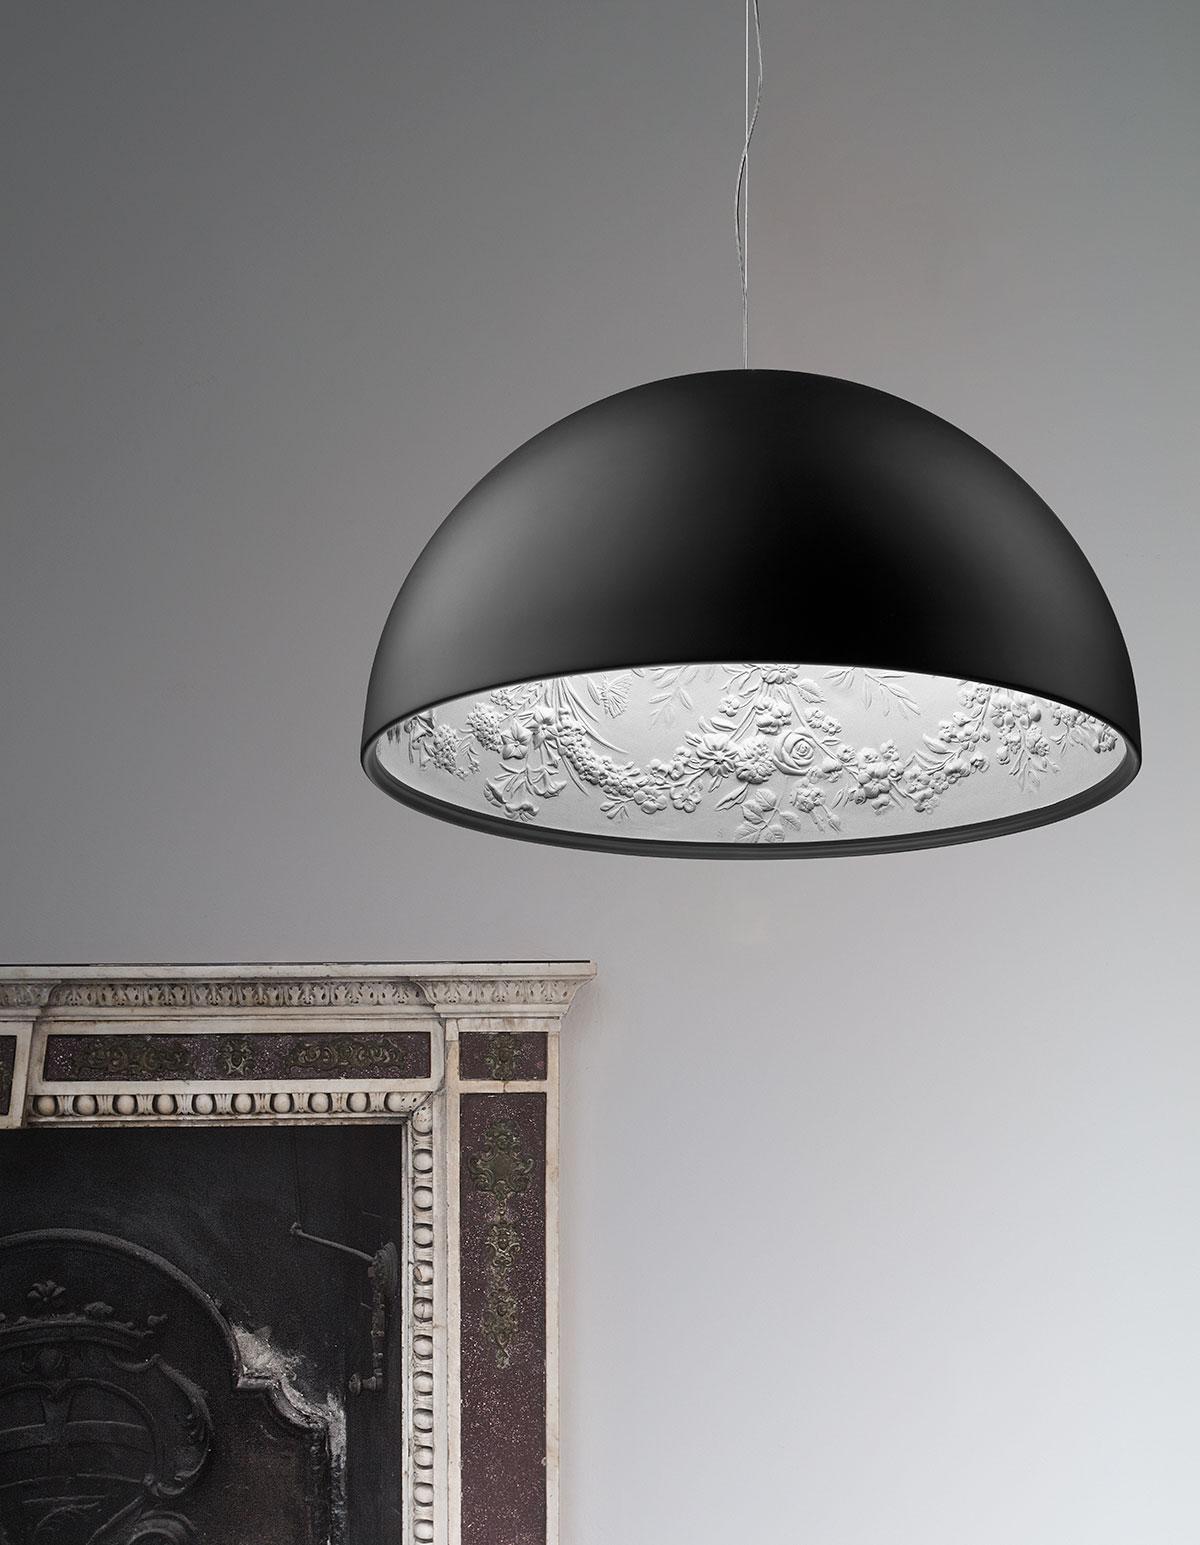 Flos skygarden S1 suspension lamp in matte black by Marcel Wanders

Material: Plaster, glass, stainless steel
Lamp type: Halogen
Lamp included: Yes
Light source: 1 x 100W T8 E26 base frosted halogen (Included)
Mounting: Ceiling